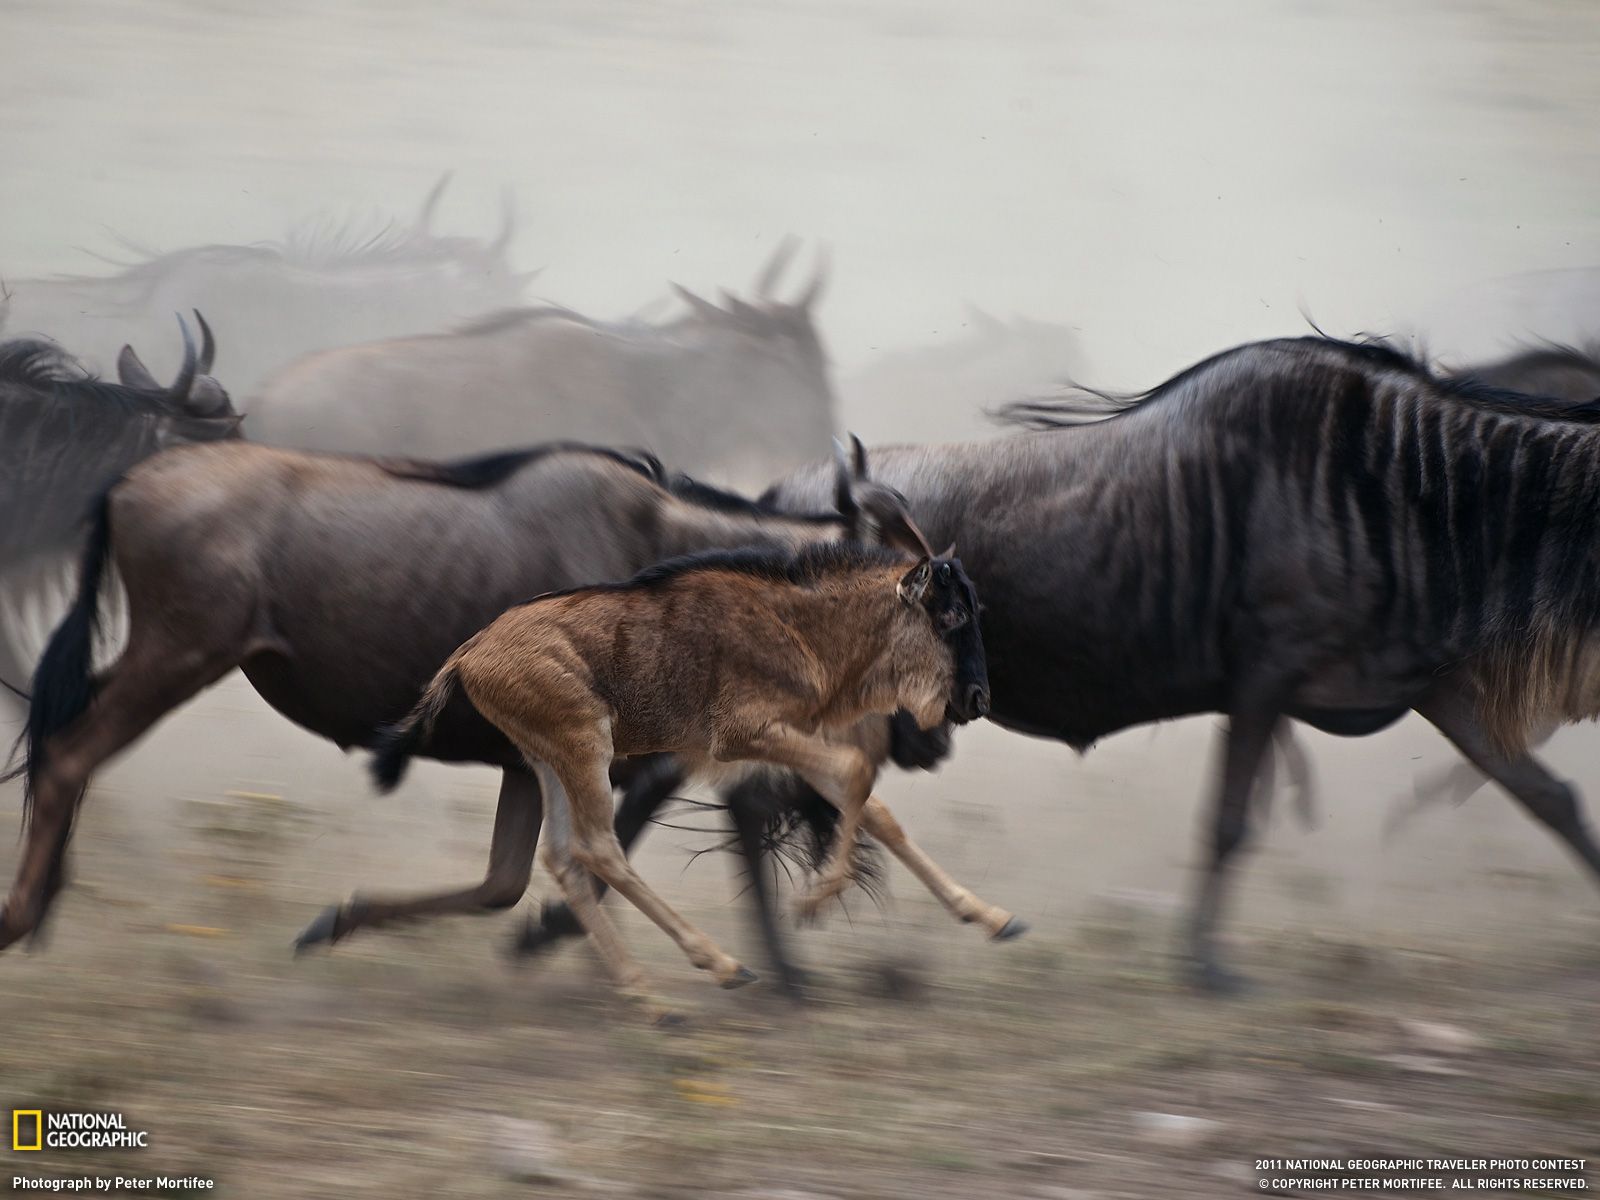 Wildebeest Picture Animal Wallpaper - National Geographic Photo